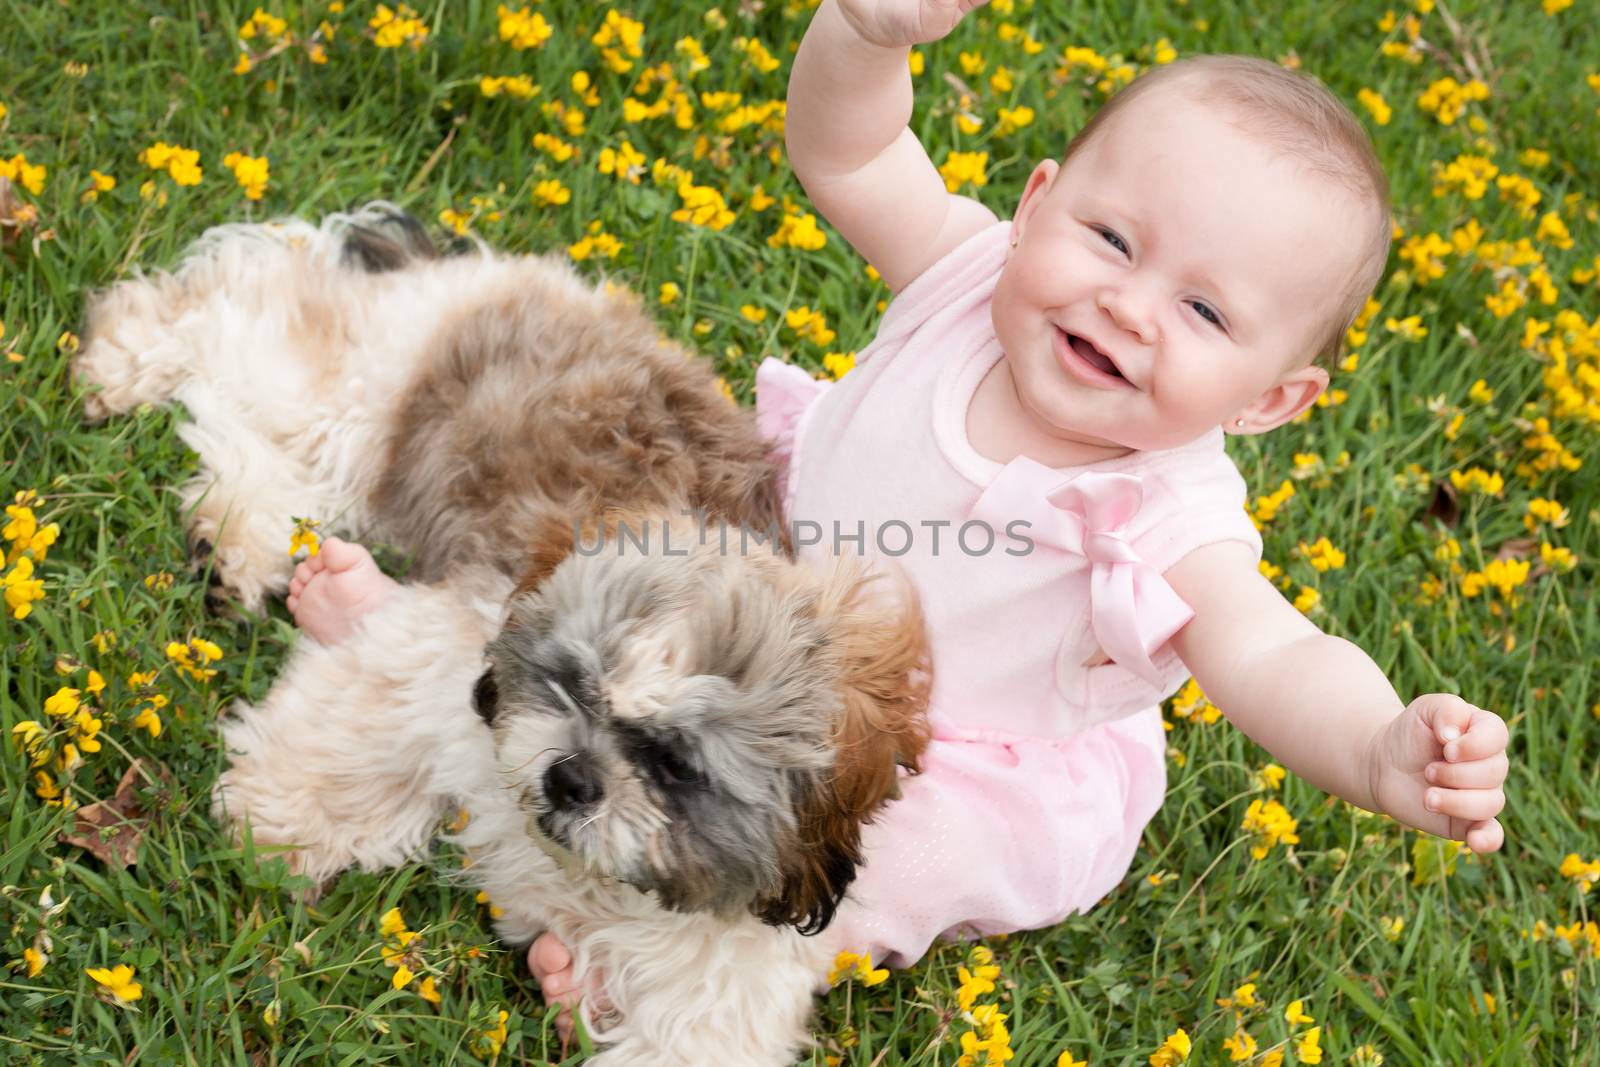 Sweet baby girl and puppy in a field of buttercups